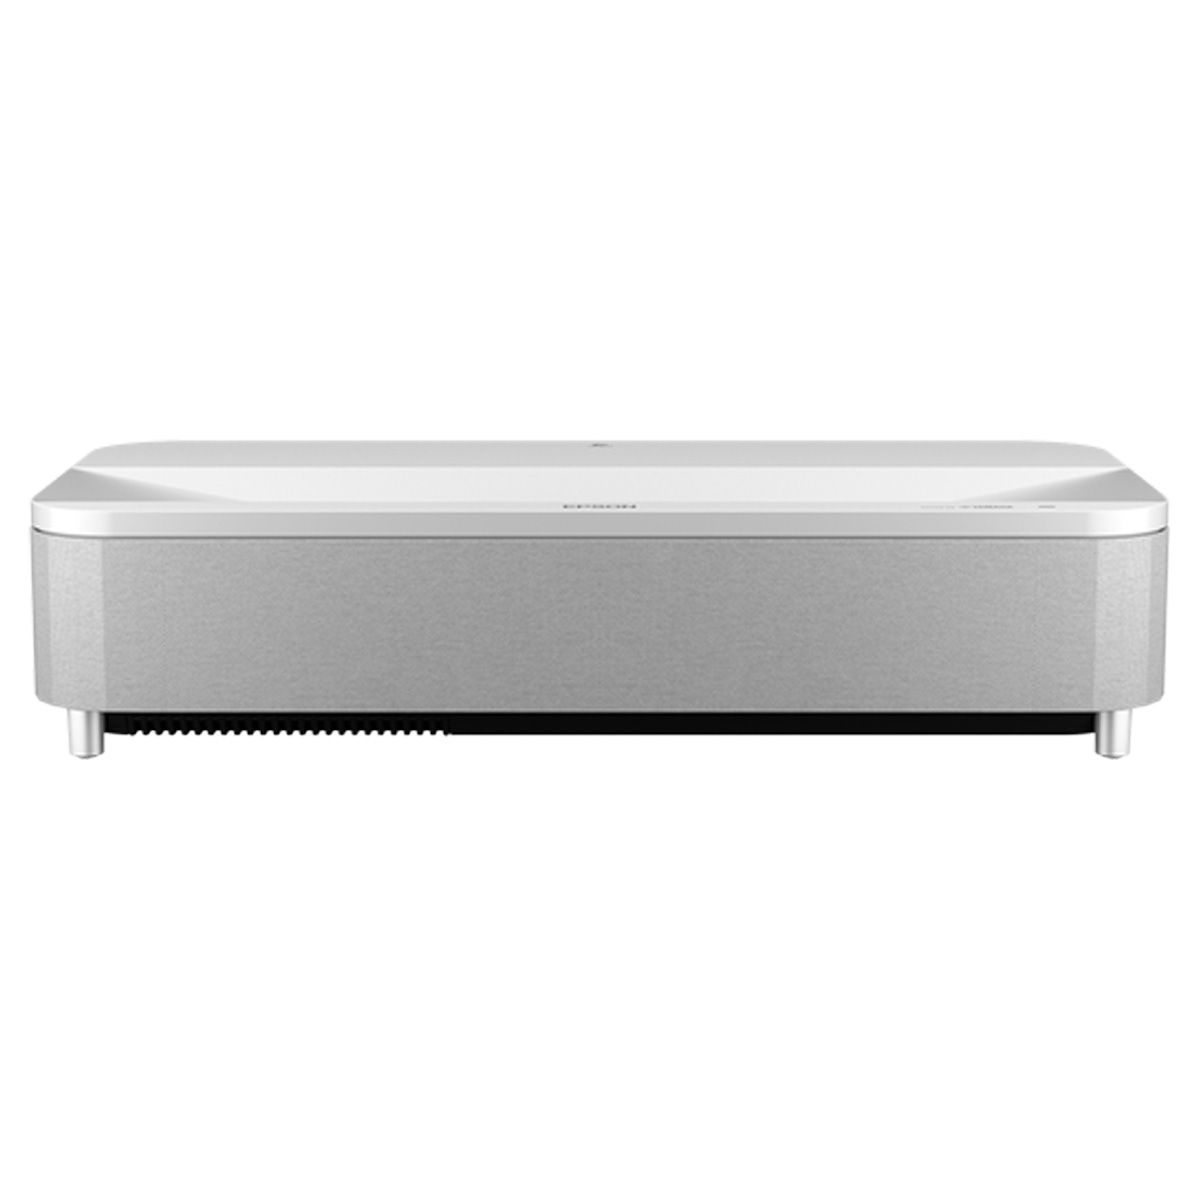 Epson LS800 UST Projector - White - front view